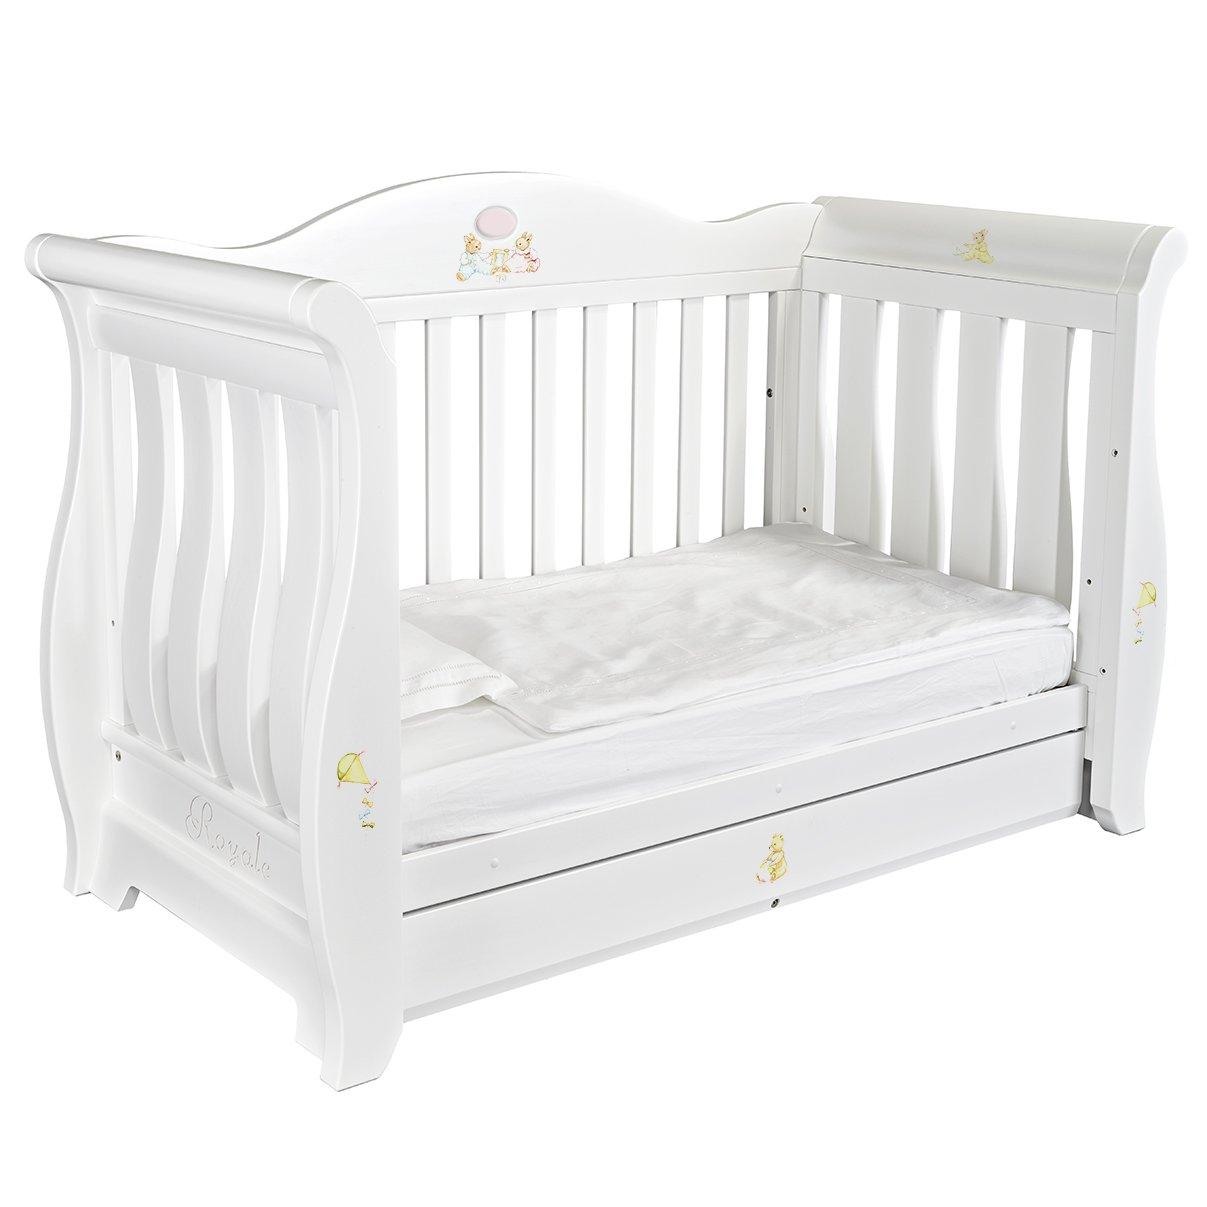 Sleigh Cot Bed